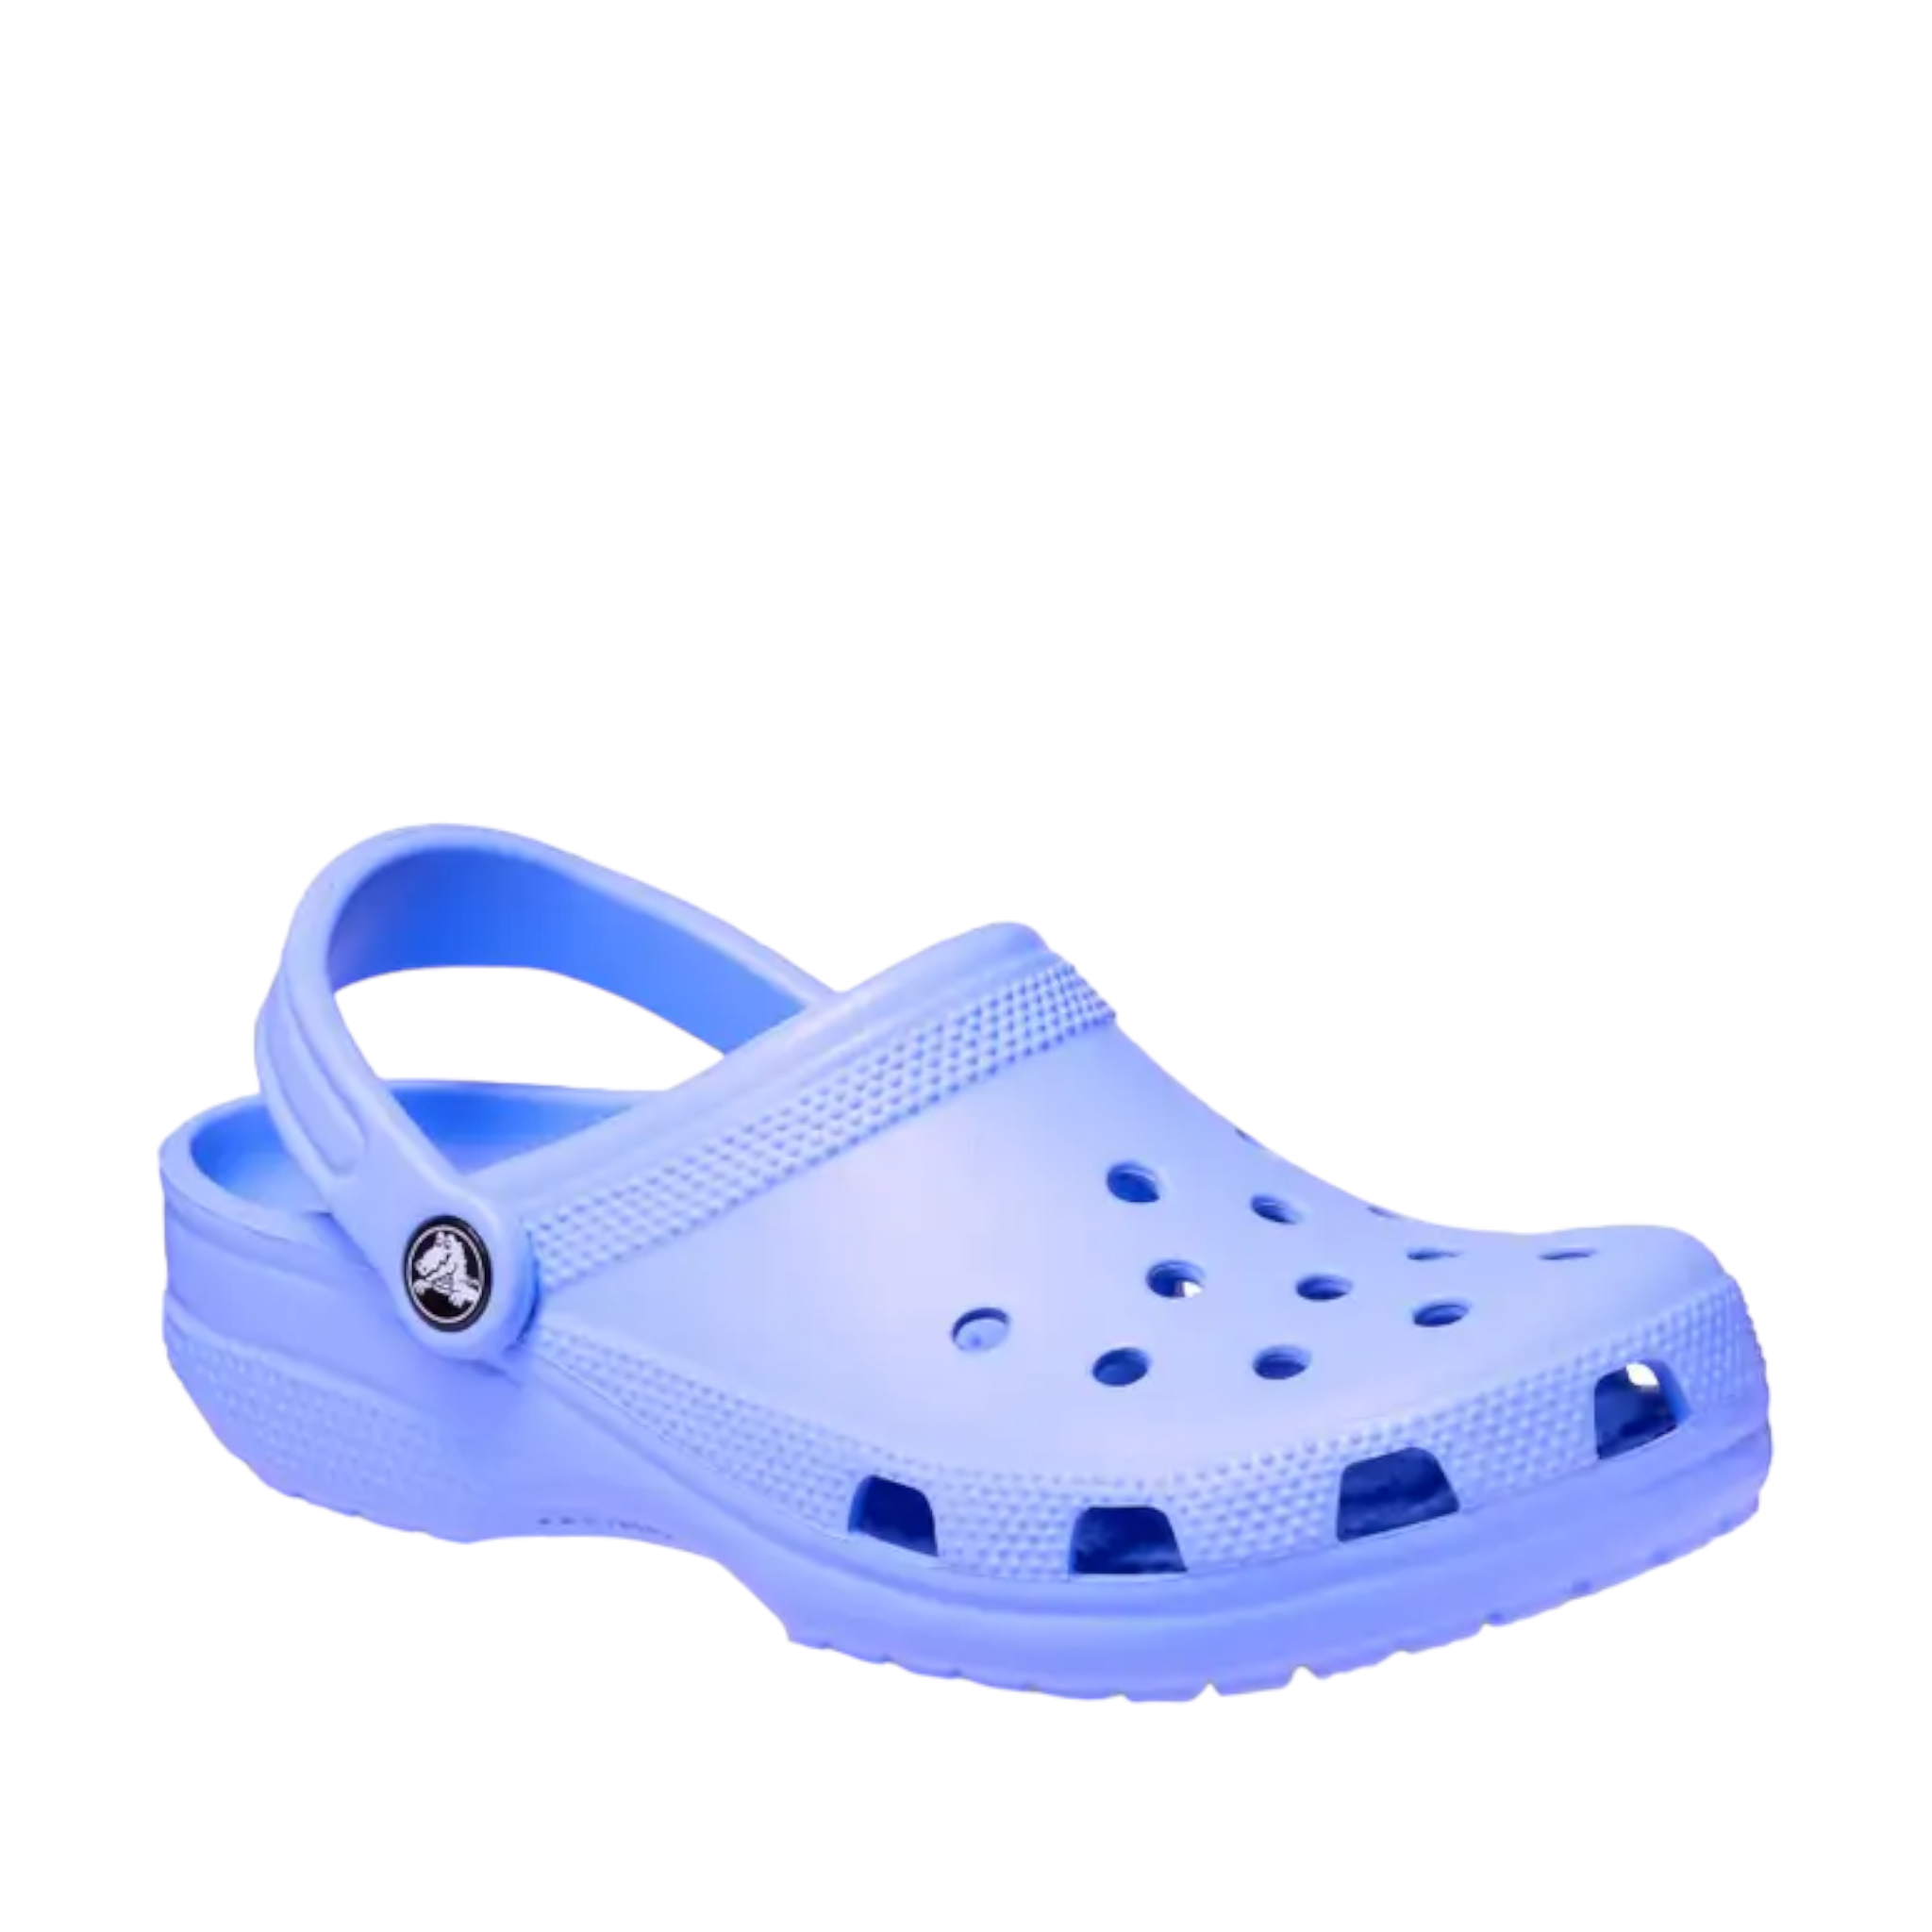 Crocs Classic Clogs online and instore with shoe&me Mount Maunganui. Shop Moon Jelly Clogs